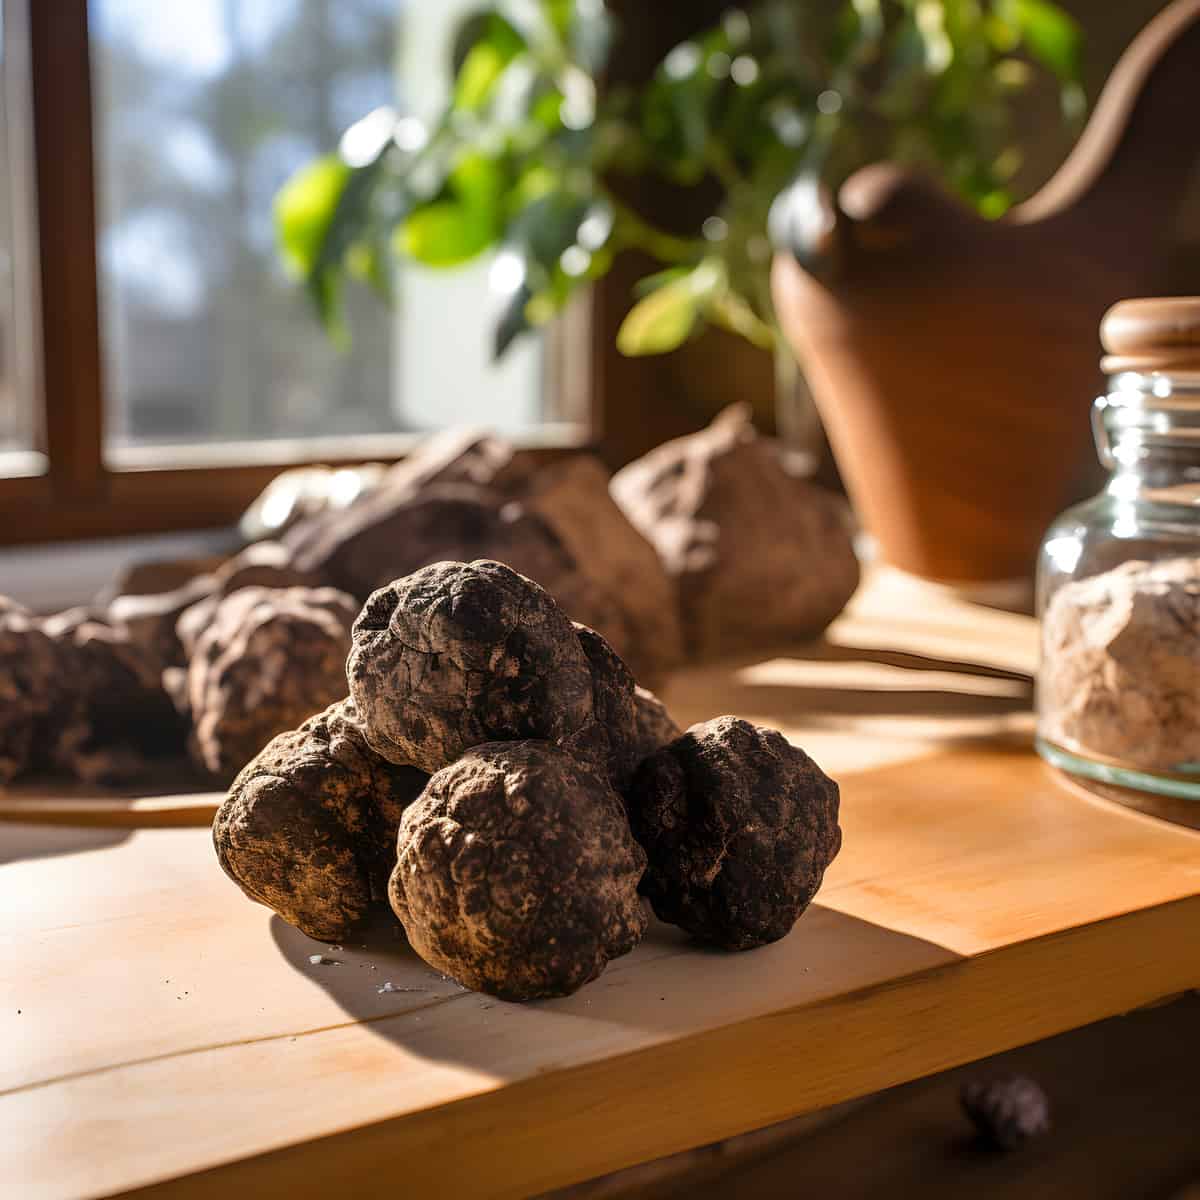 Truffles on a kitchen counter